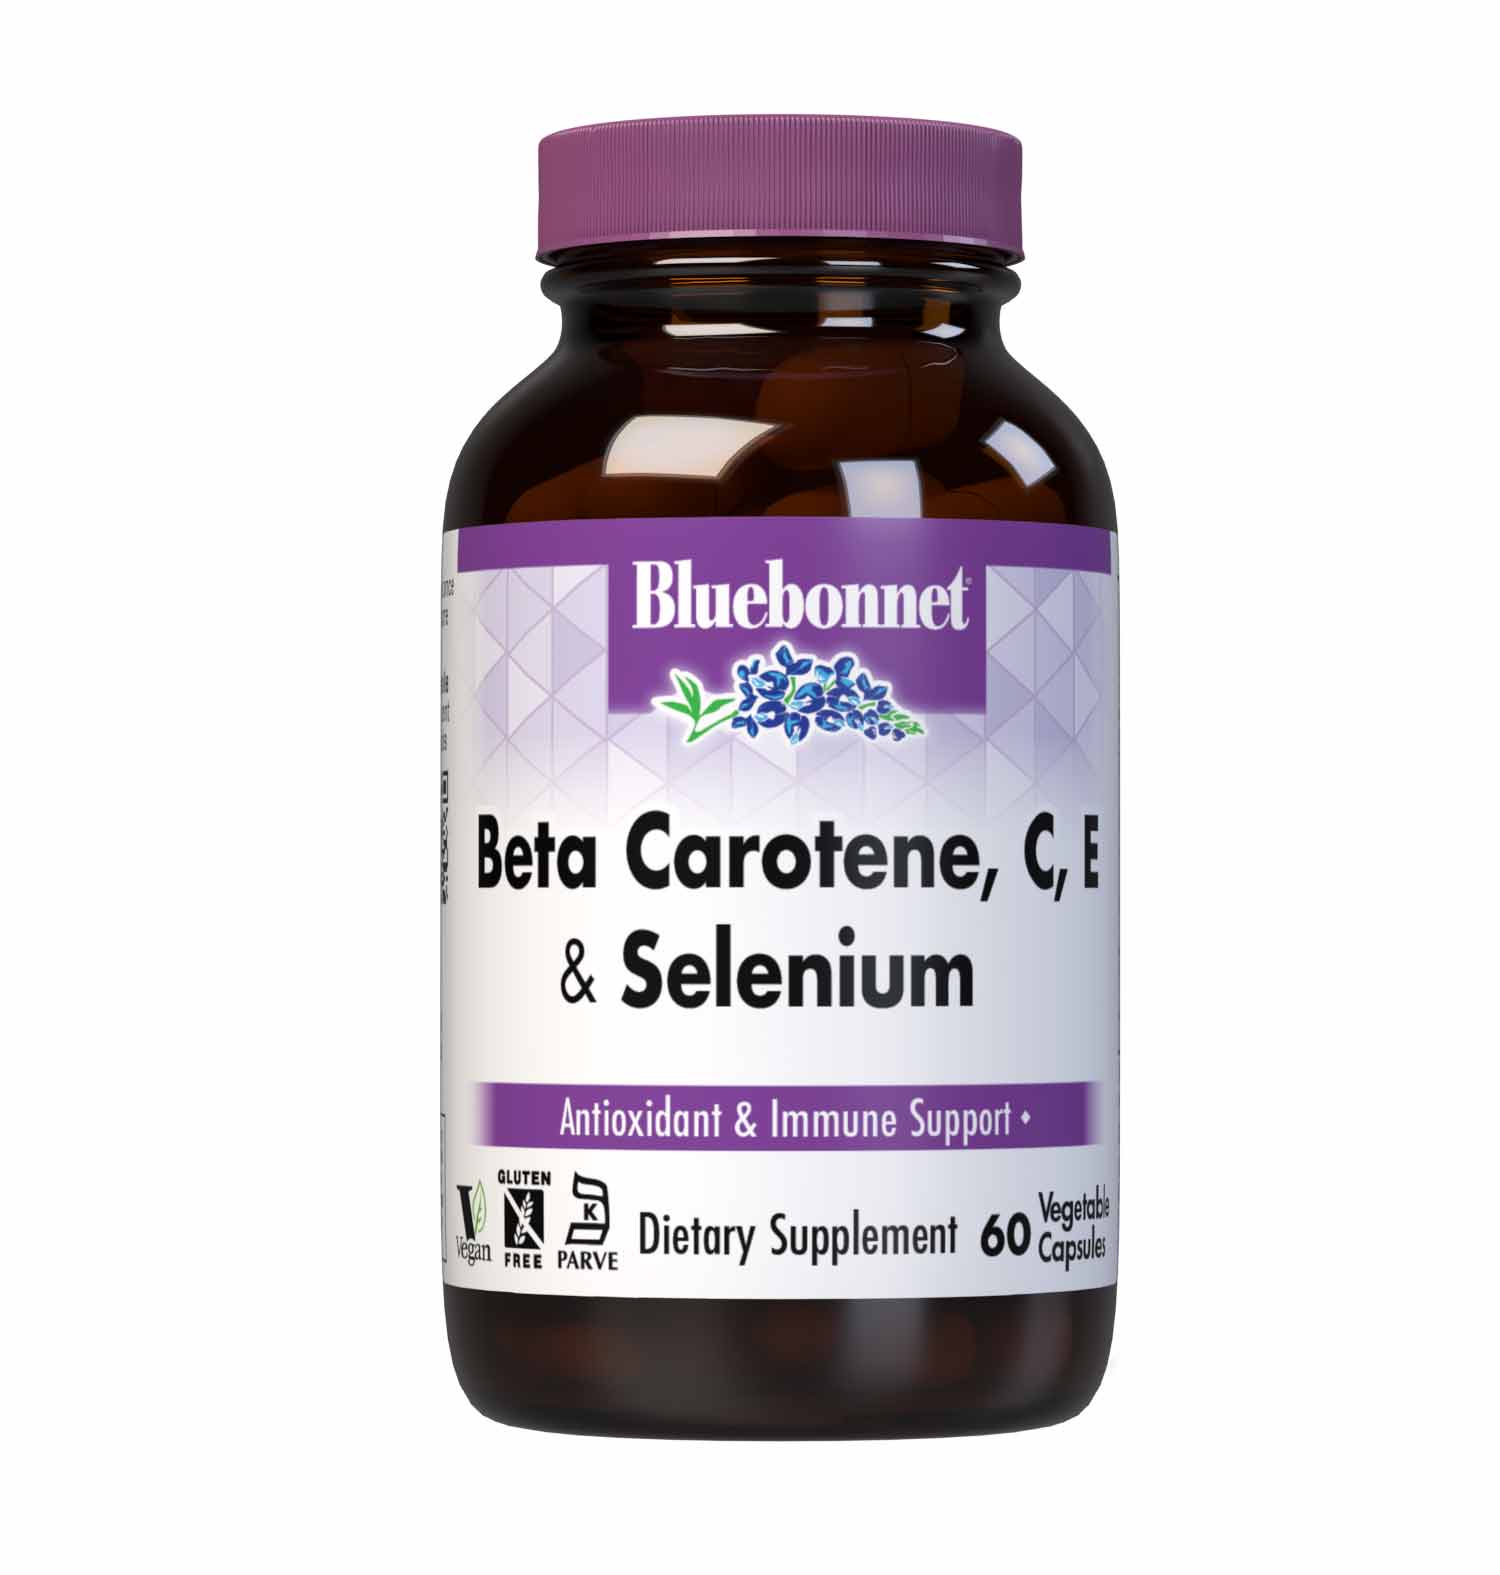 Bluebonnet’s Beta-Carotene, C, E and Selenium 60 Vegetable Capsules are specially formulated with a combination of four potent antioxidants: beta-carotene that provides mixed provitamin A carotenoids (gamma carotene and beta-zeacarotene), vitamin C from L-ascorbic acid, d-alpha vitamin E and yeast-free selenomethionine. #size_60 count